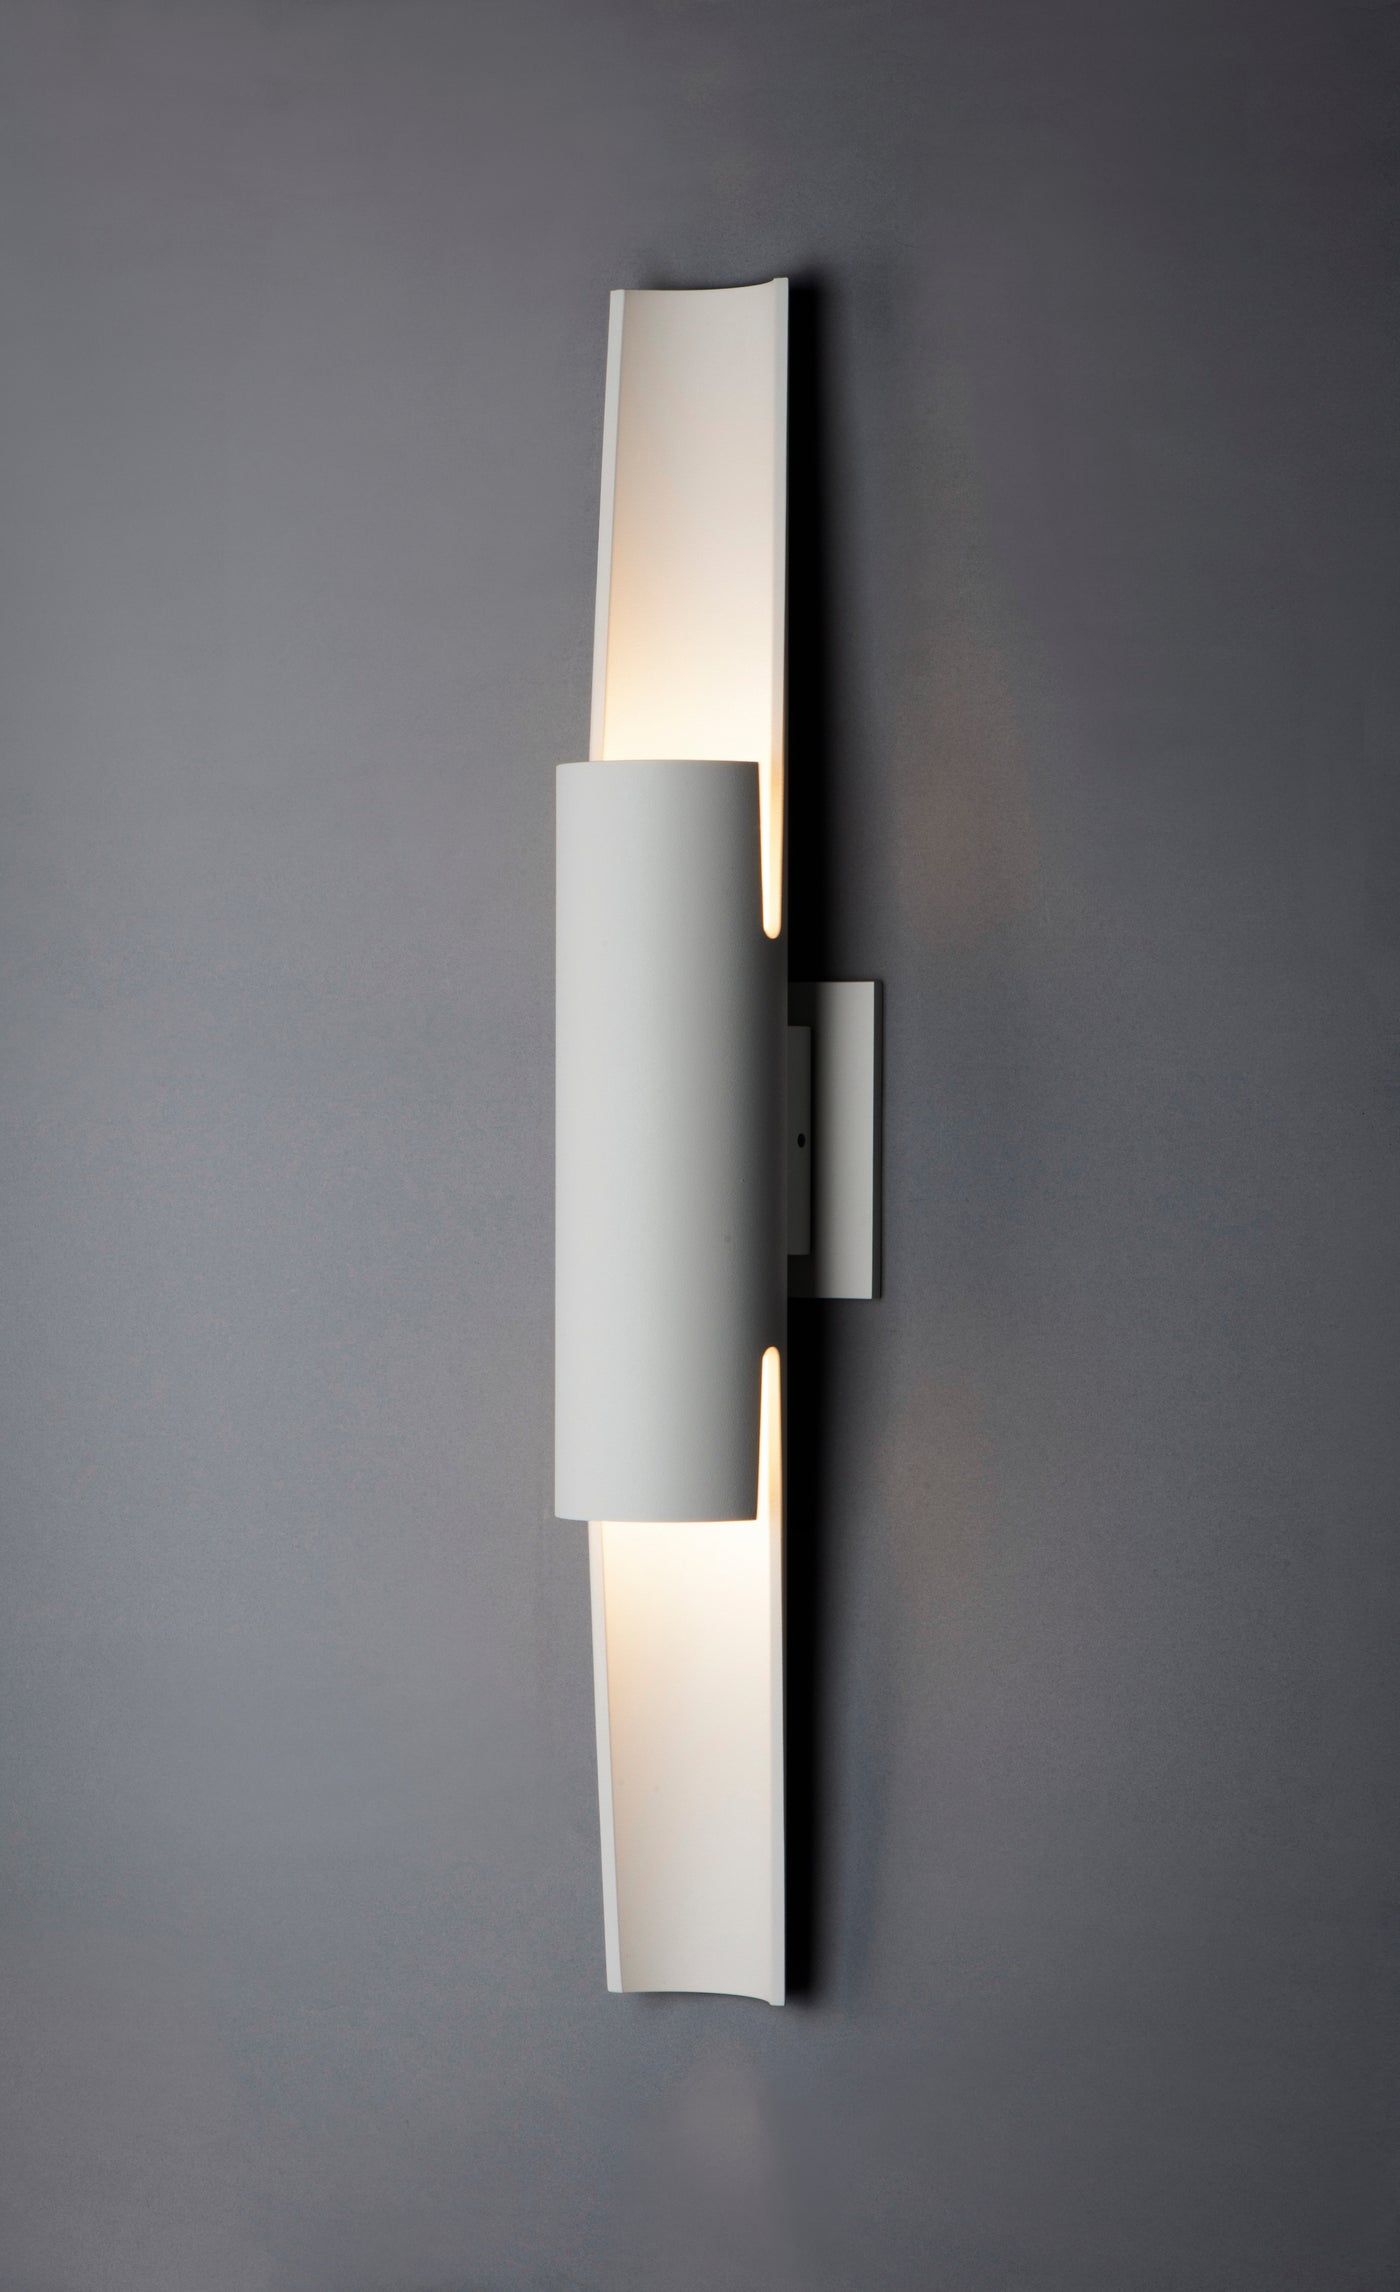  Alumilux LED Outdoor Wall Sconce E41524-WT Wall Sconce